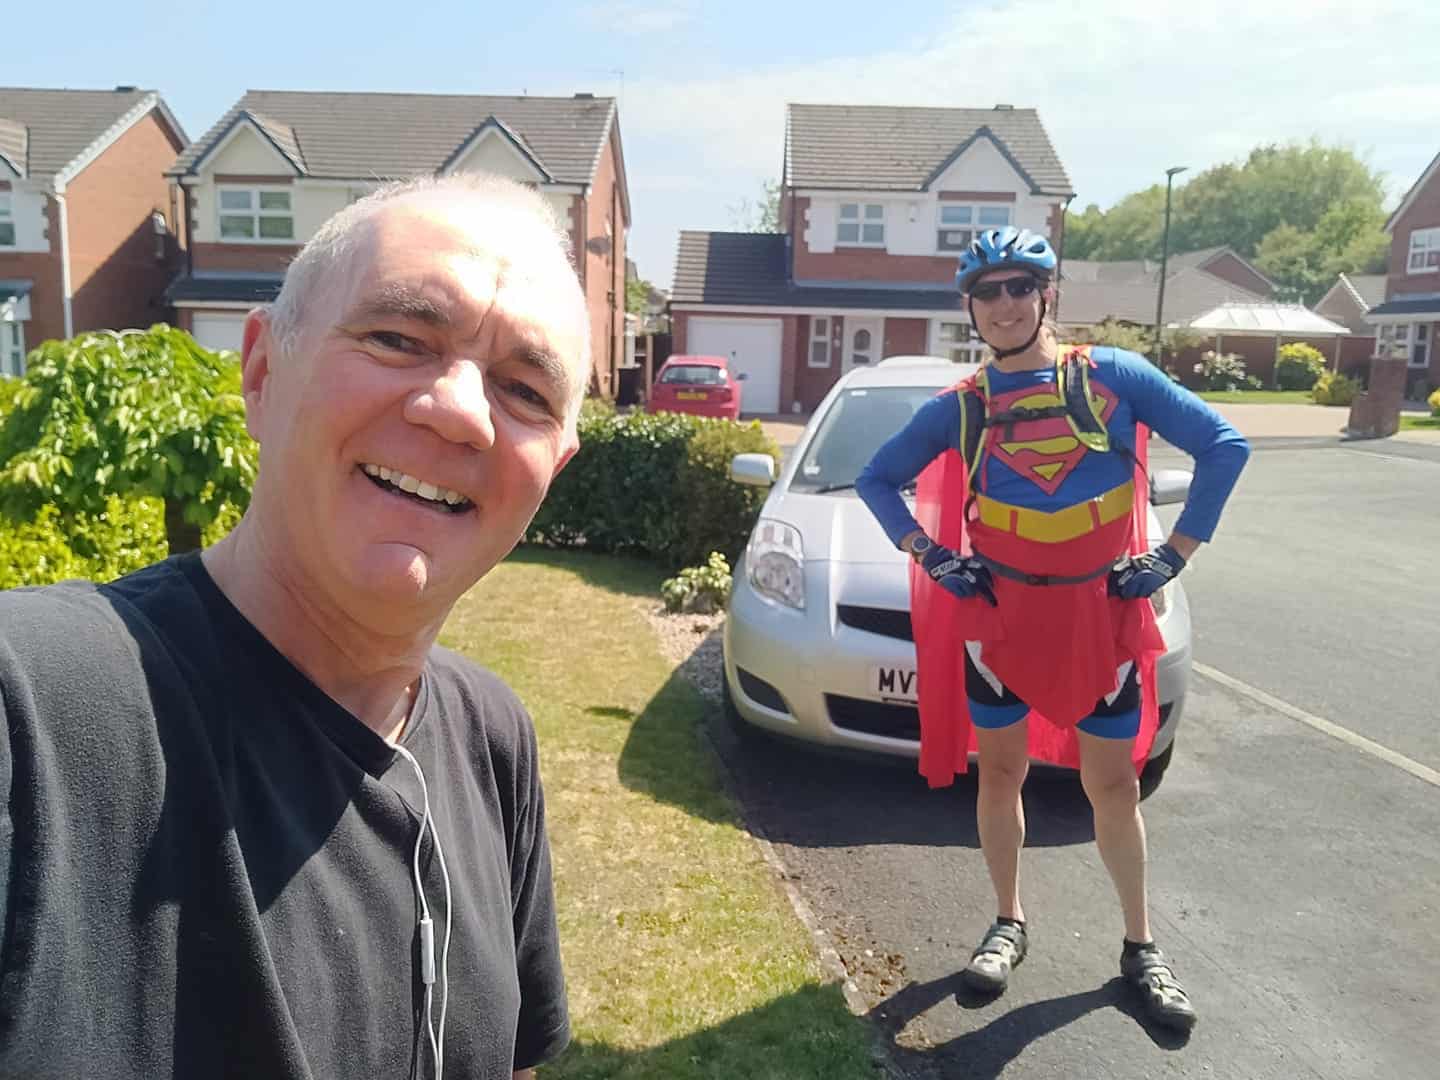 It's not very often you get to meet a real-life super-hero. ? Tony L Smith collecting some headbands for Headbands for Heroes UK.